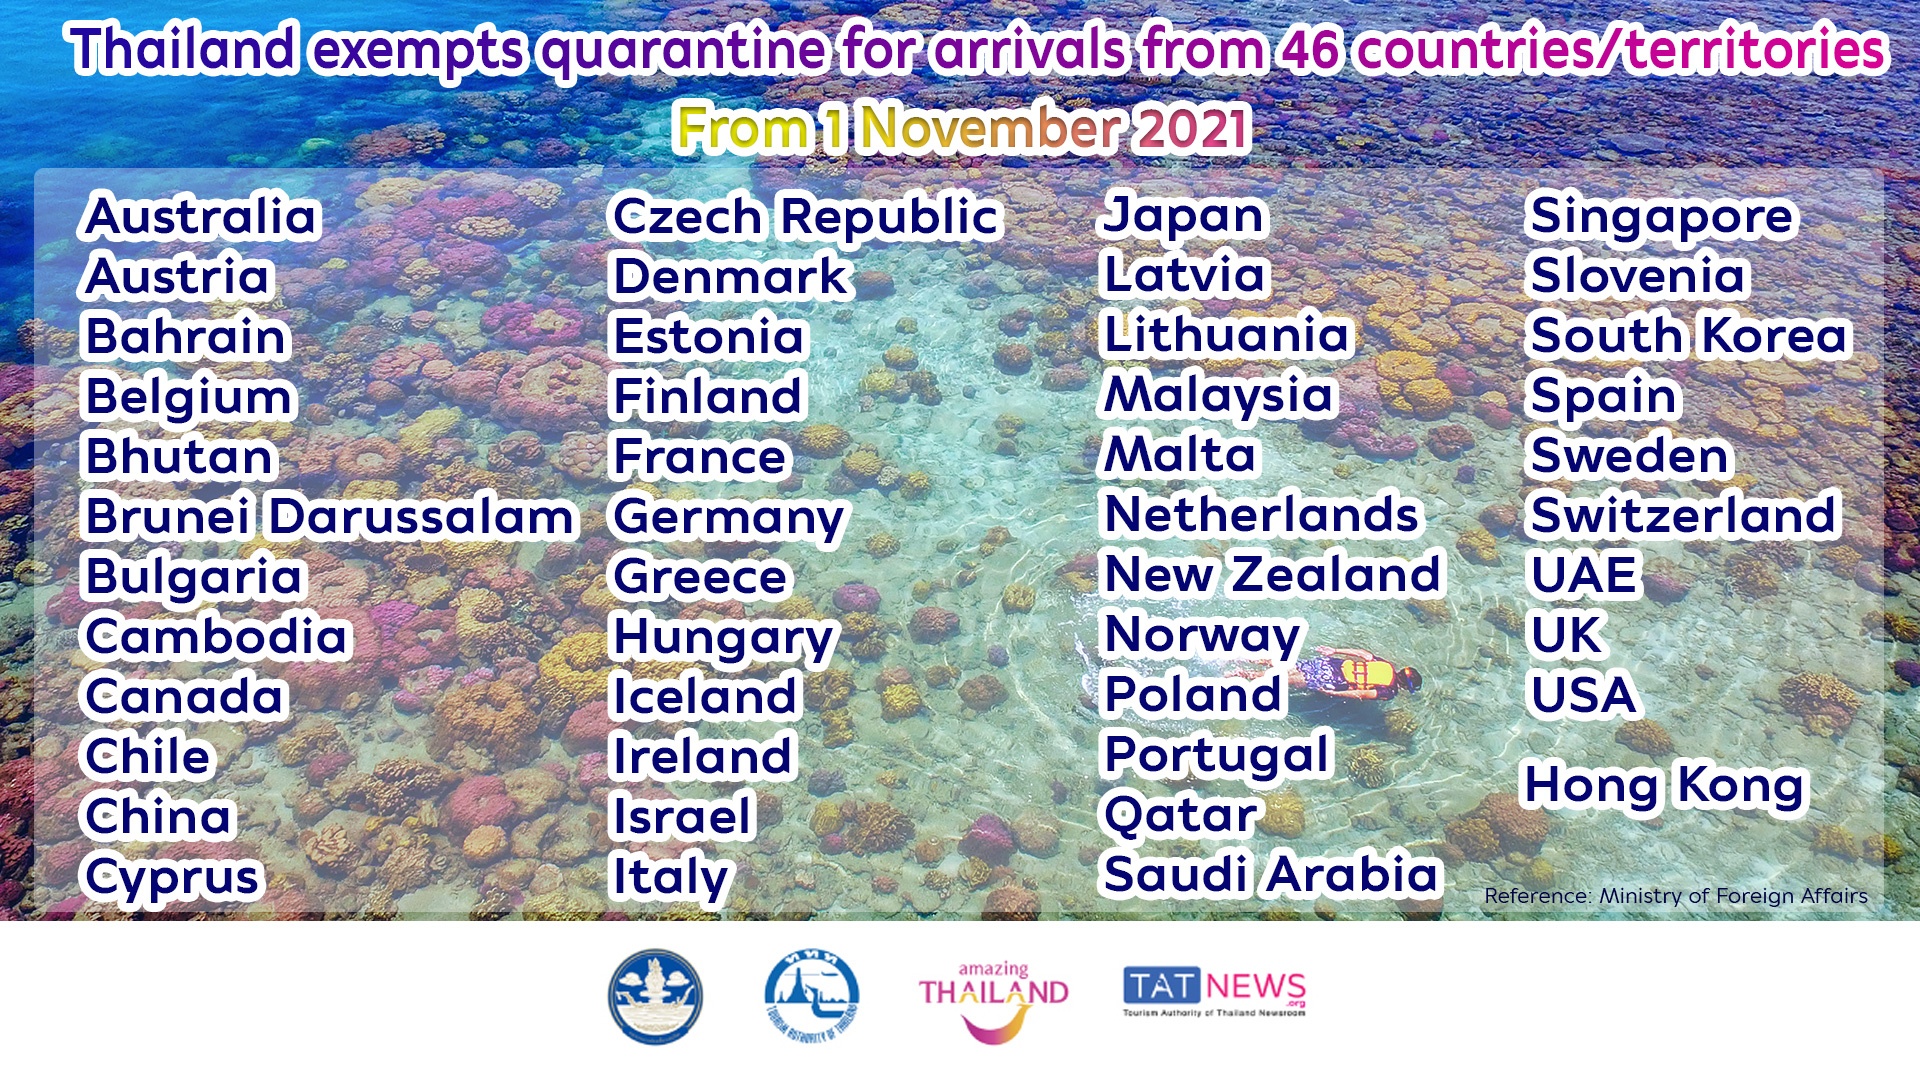 46 countries territories exempt from quarantine